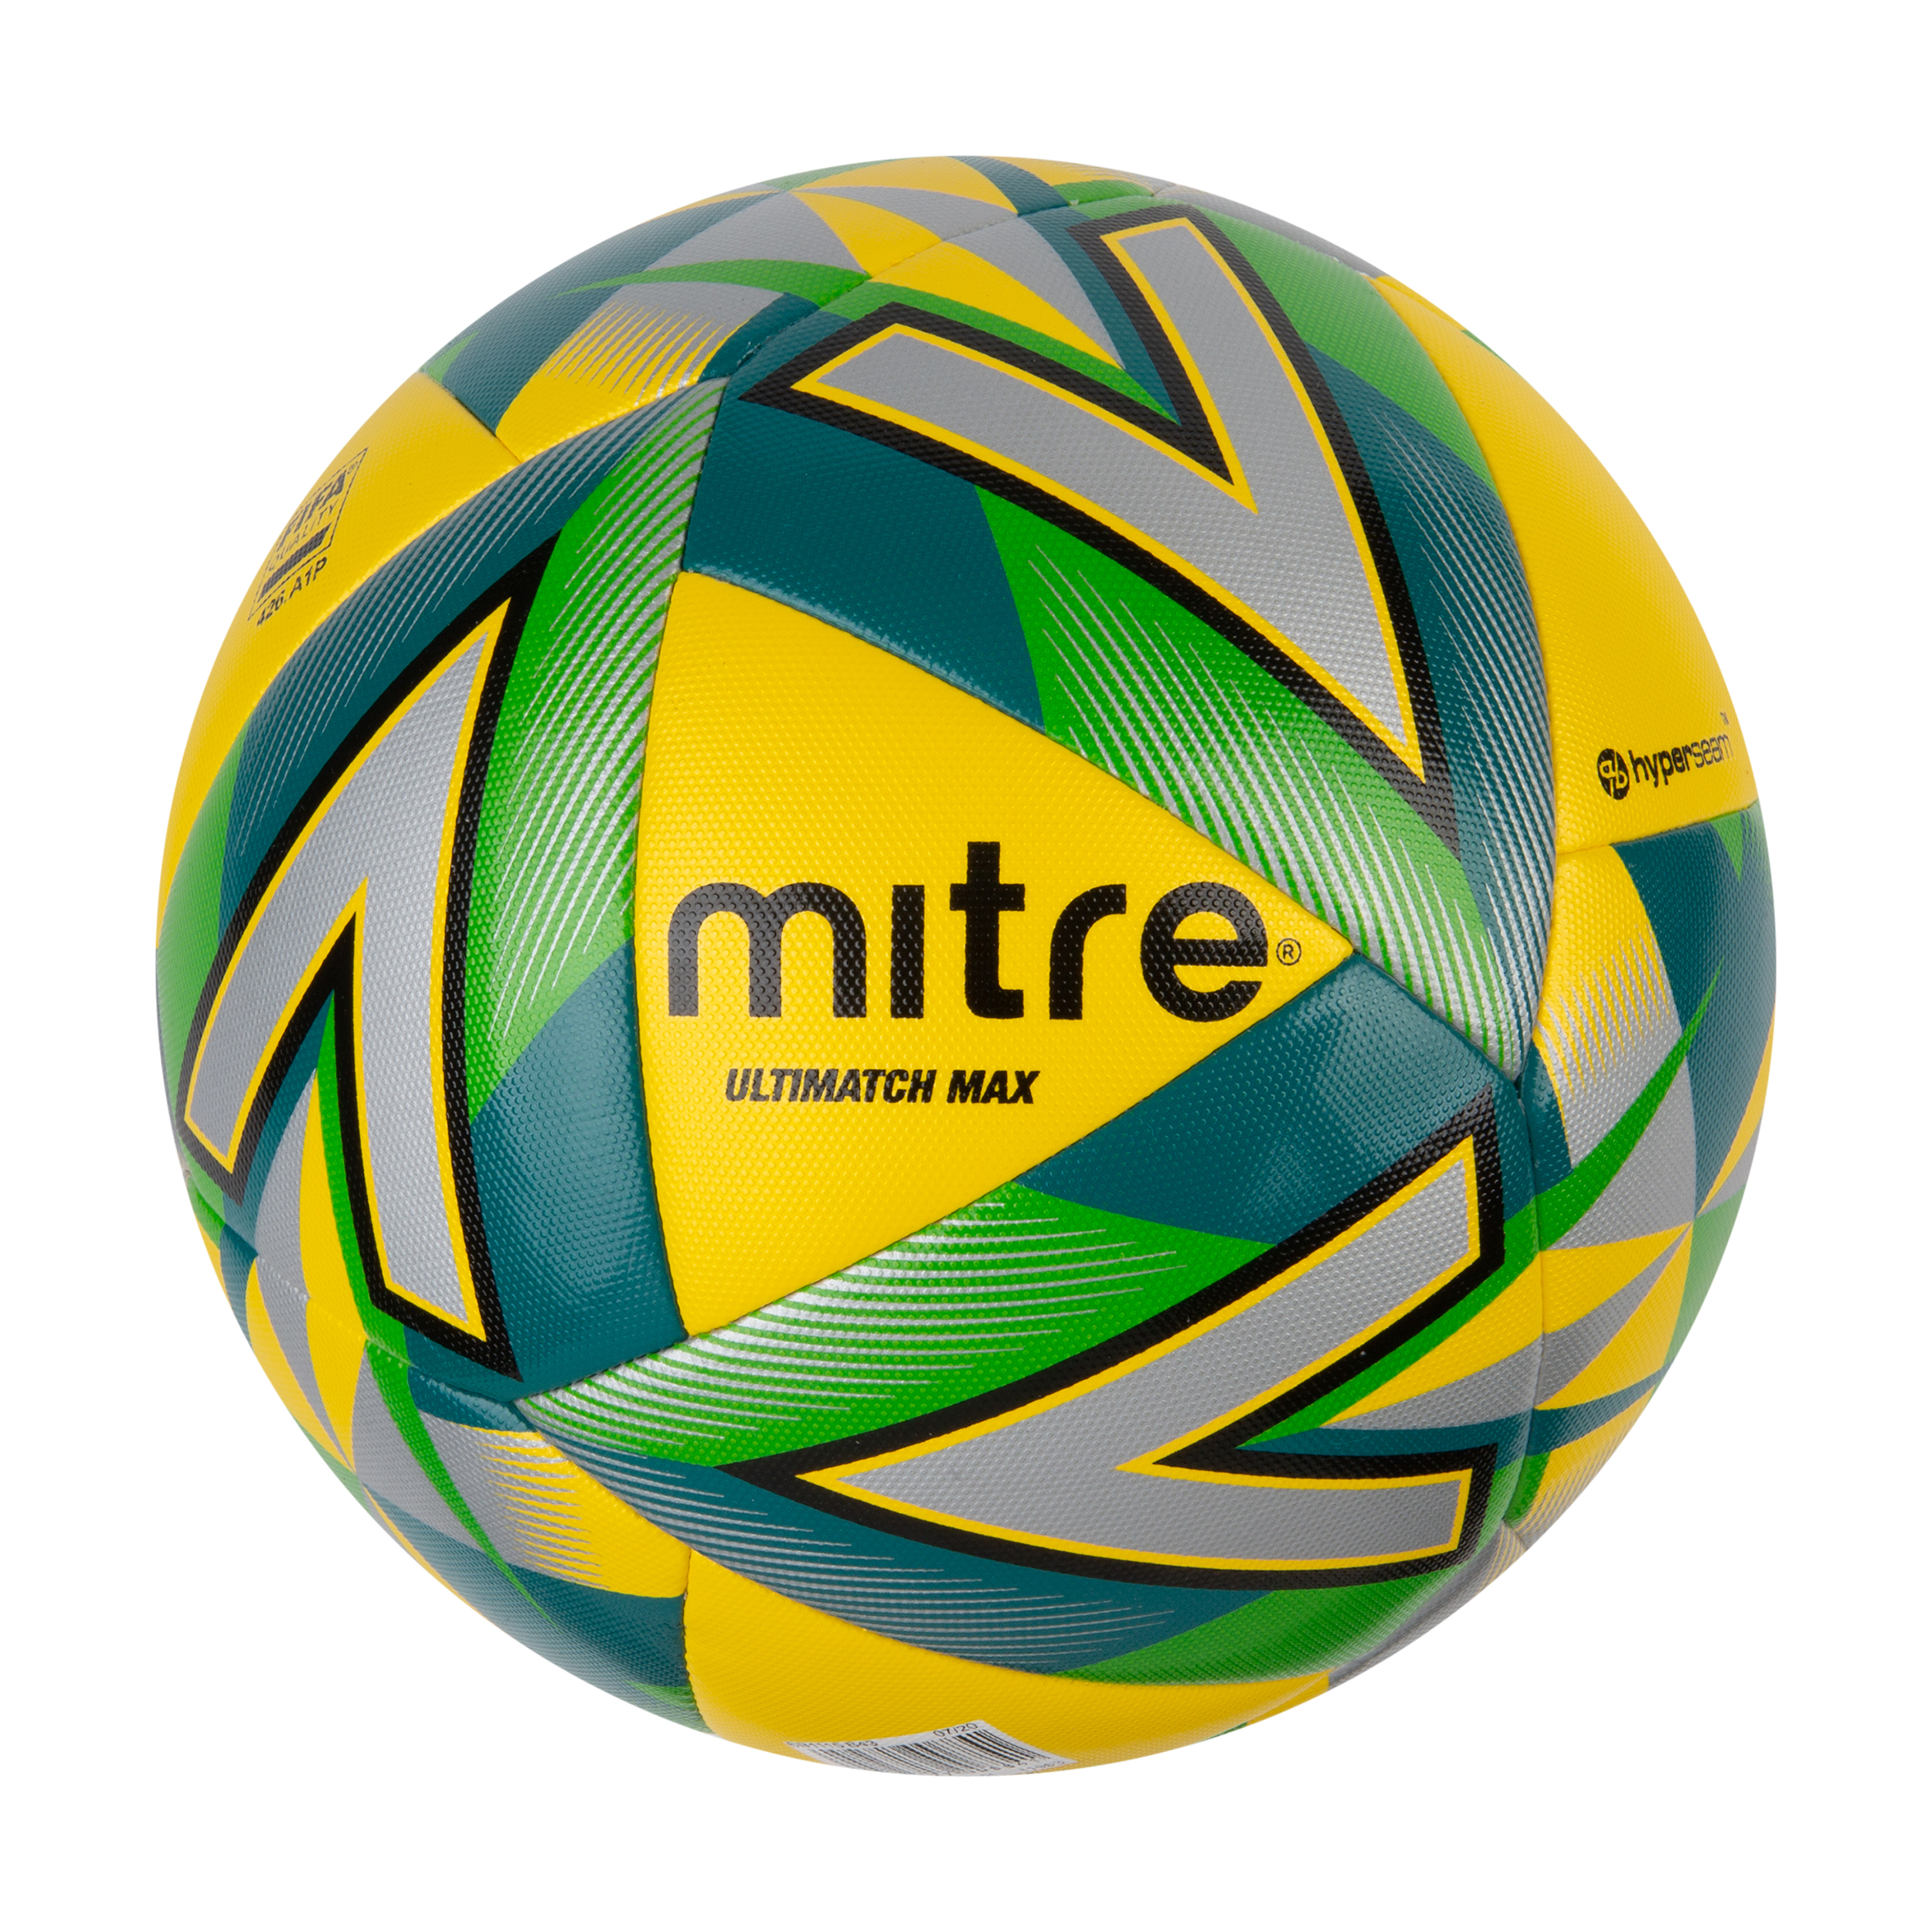 Mitre Ultimatch Max Football - YEL-4